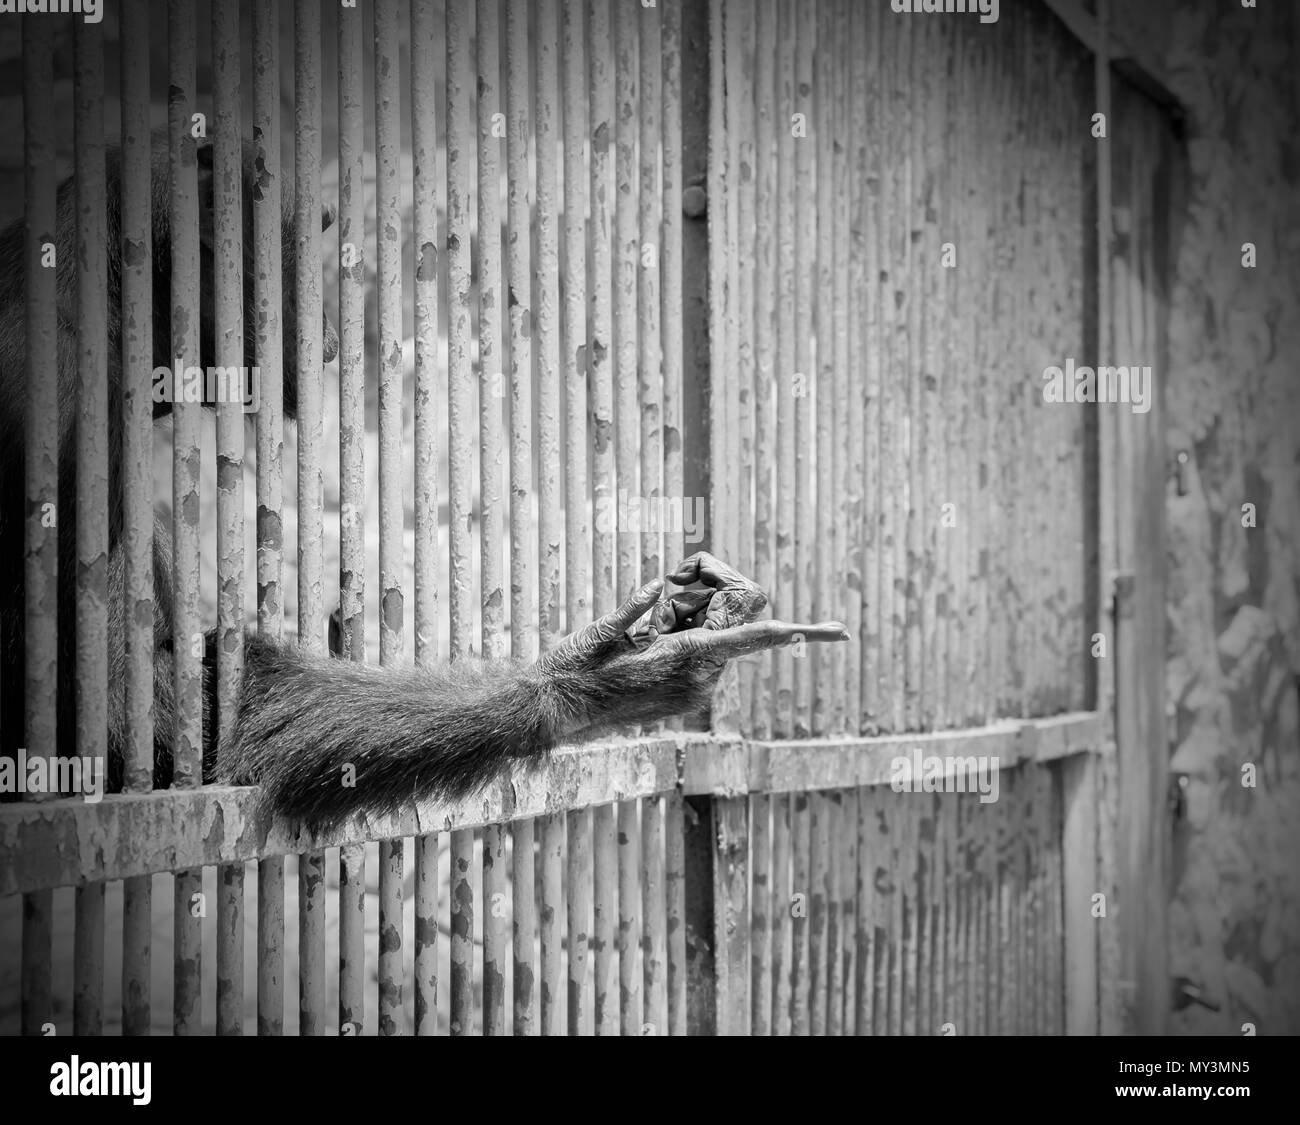 Monkey outstretched arm of cage. Black and white tone. The illegal wildlife trade problem. Stock Photo